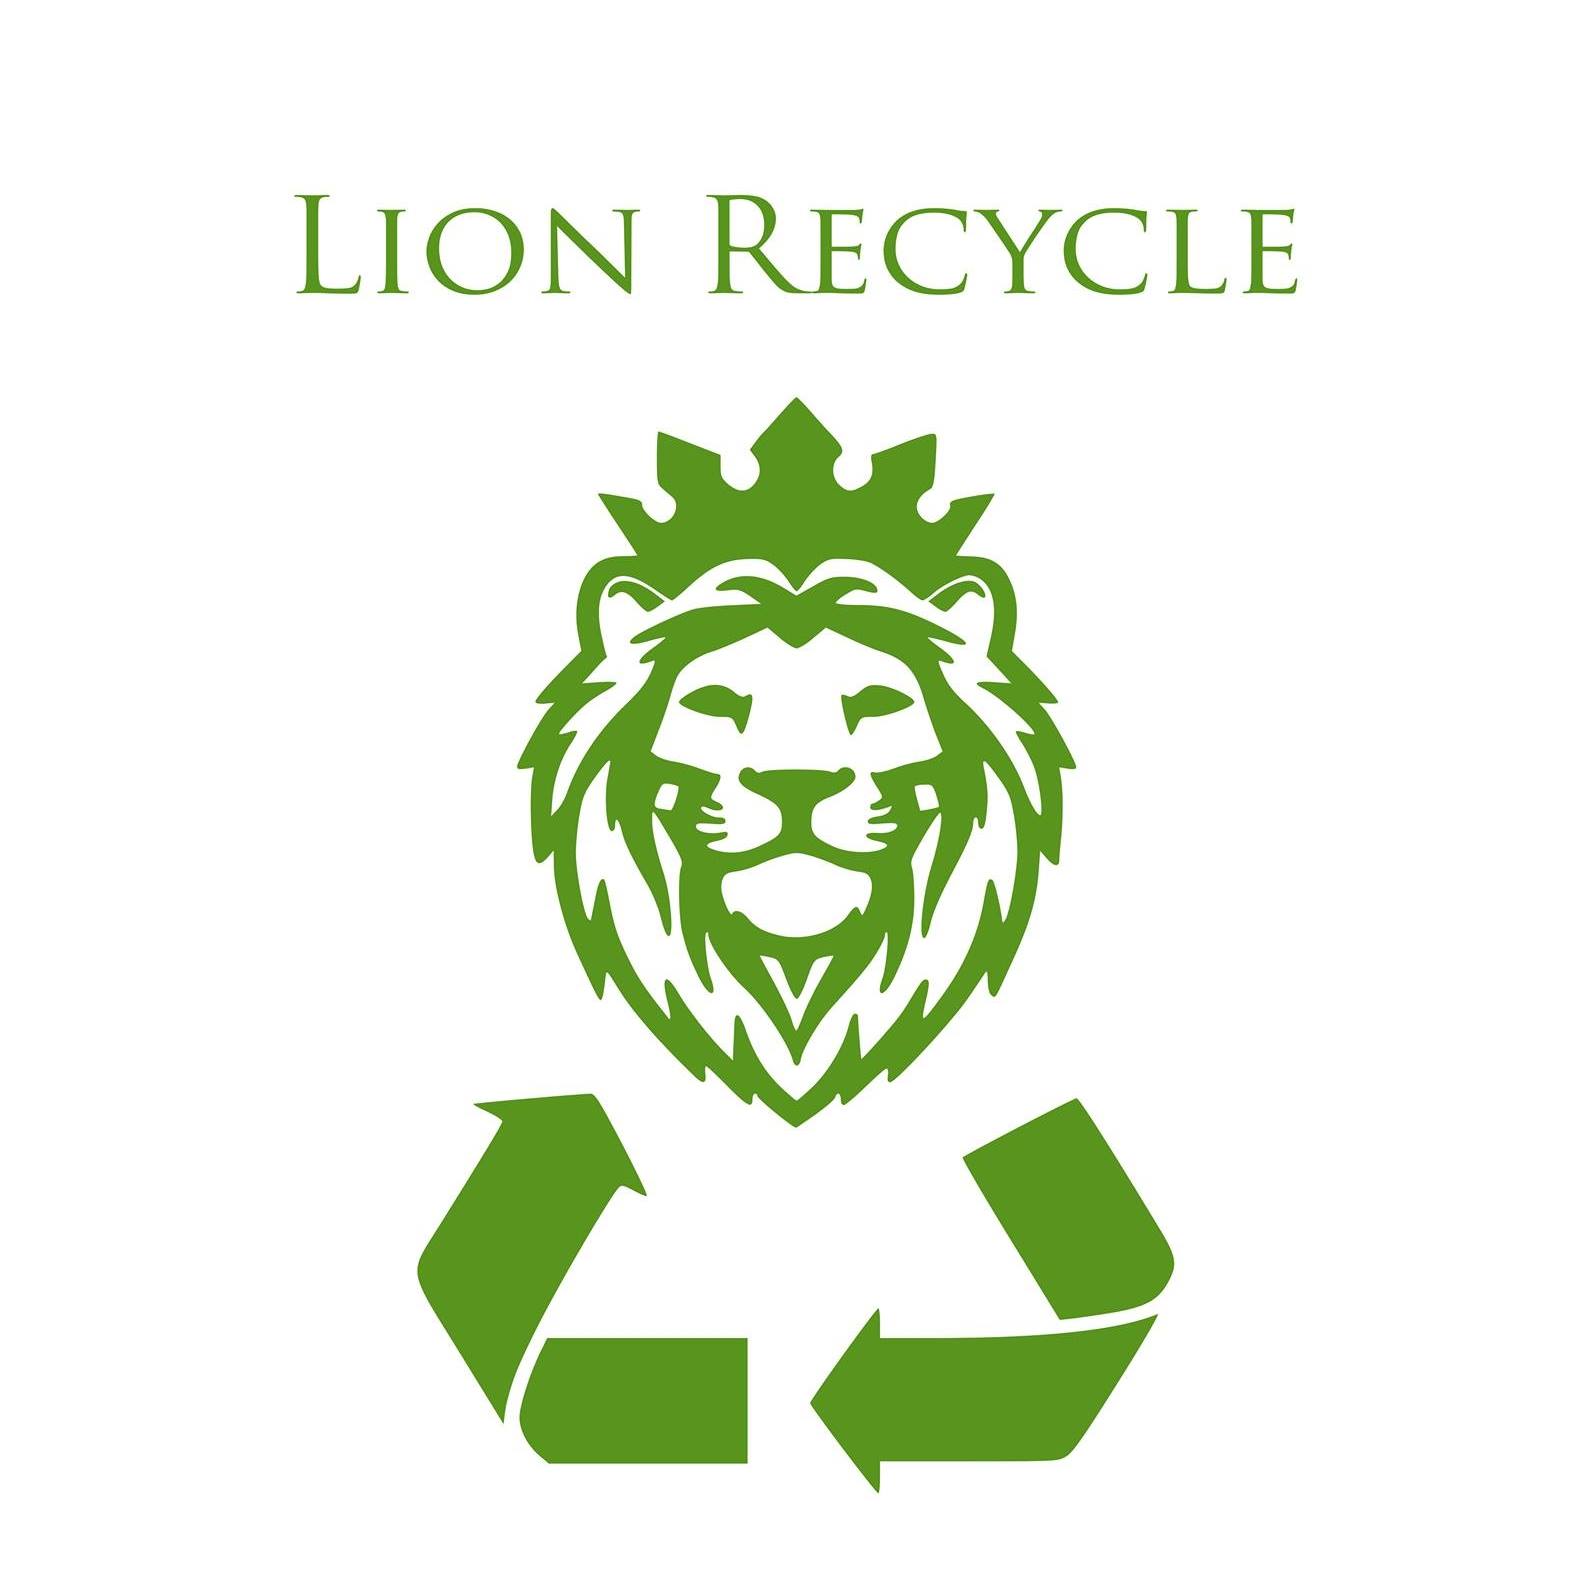 LION RECYCLE